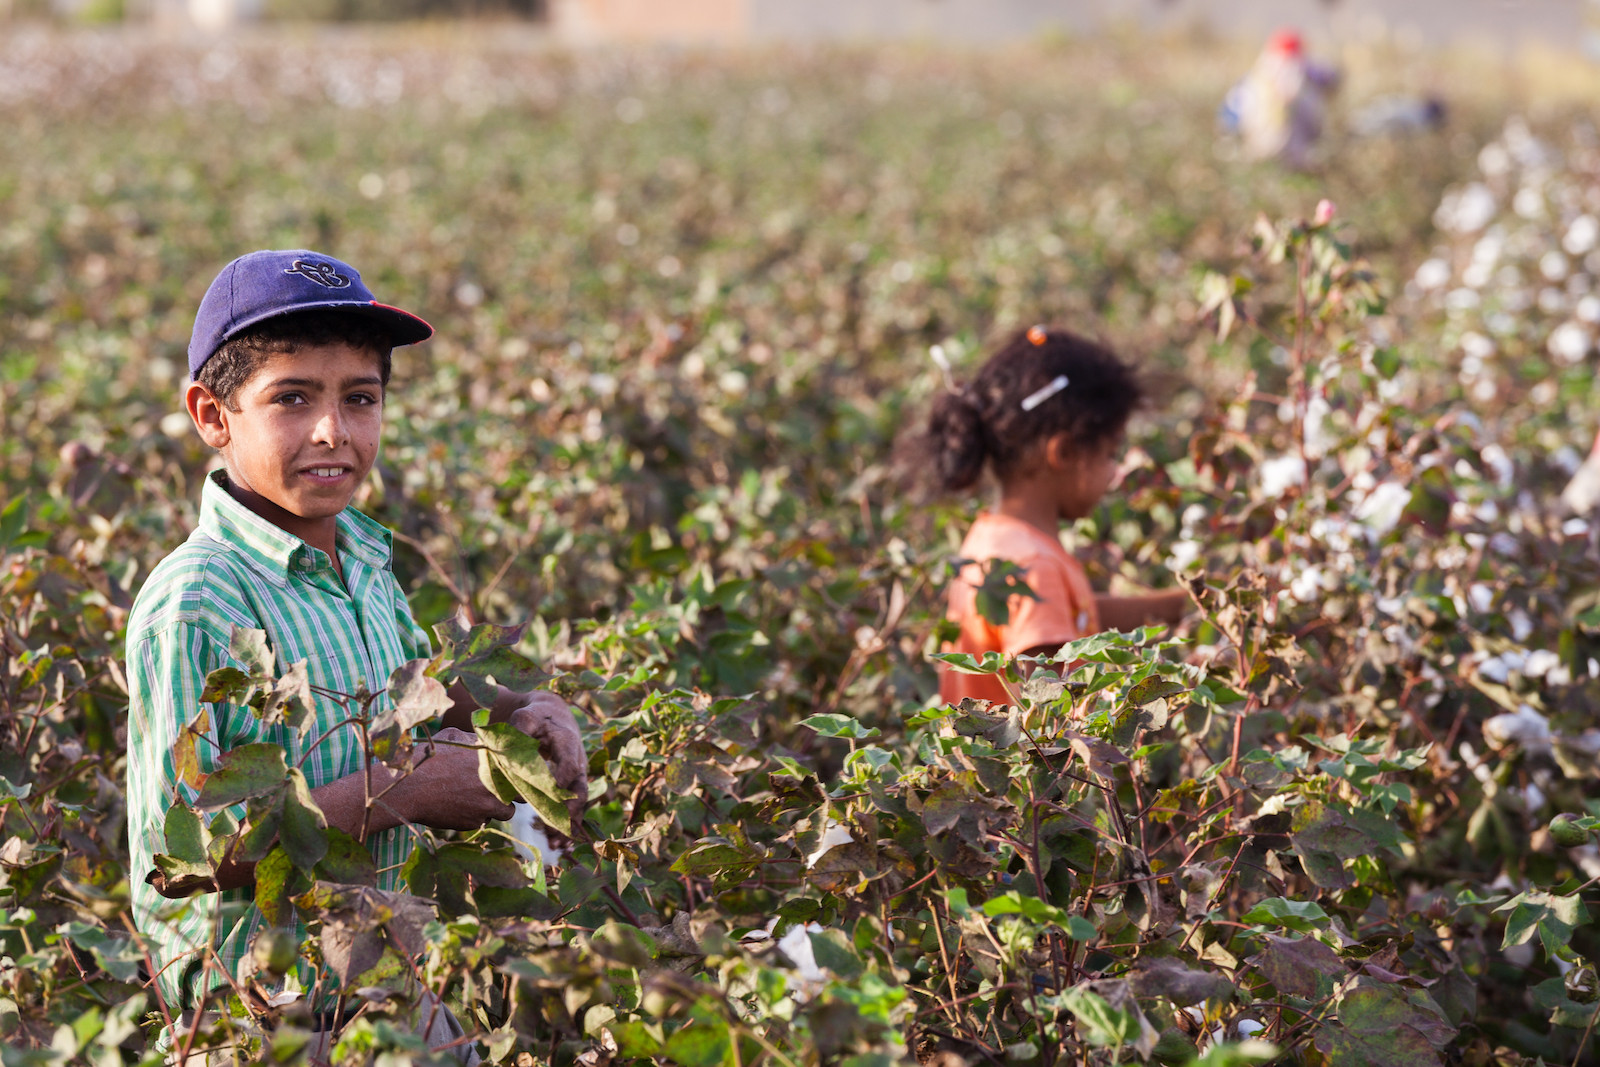 Child Labor In The Fashion Industry
 How We Can Tackle Child Labor and Modern Day Slavery in